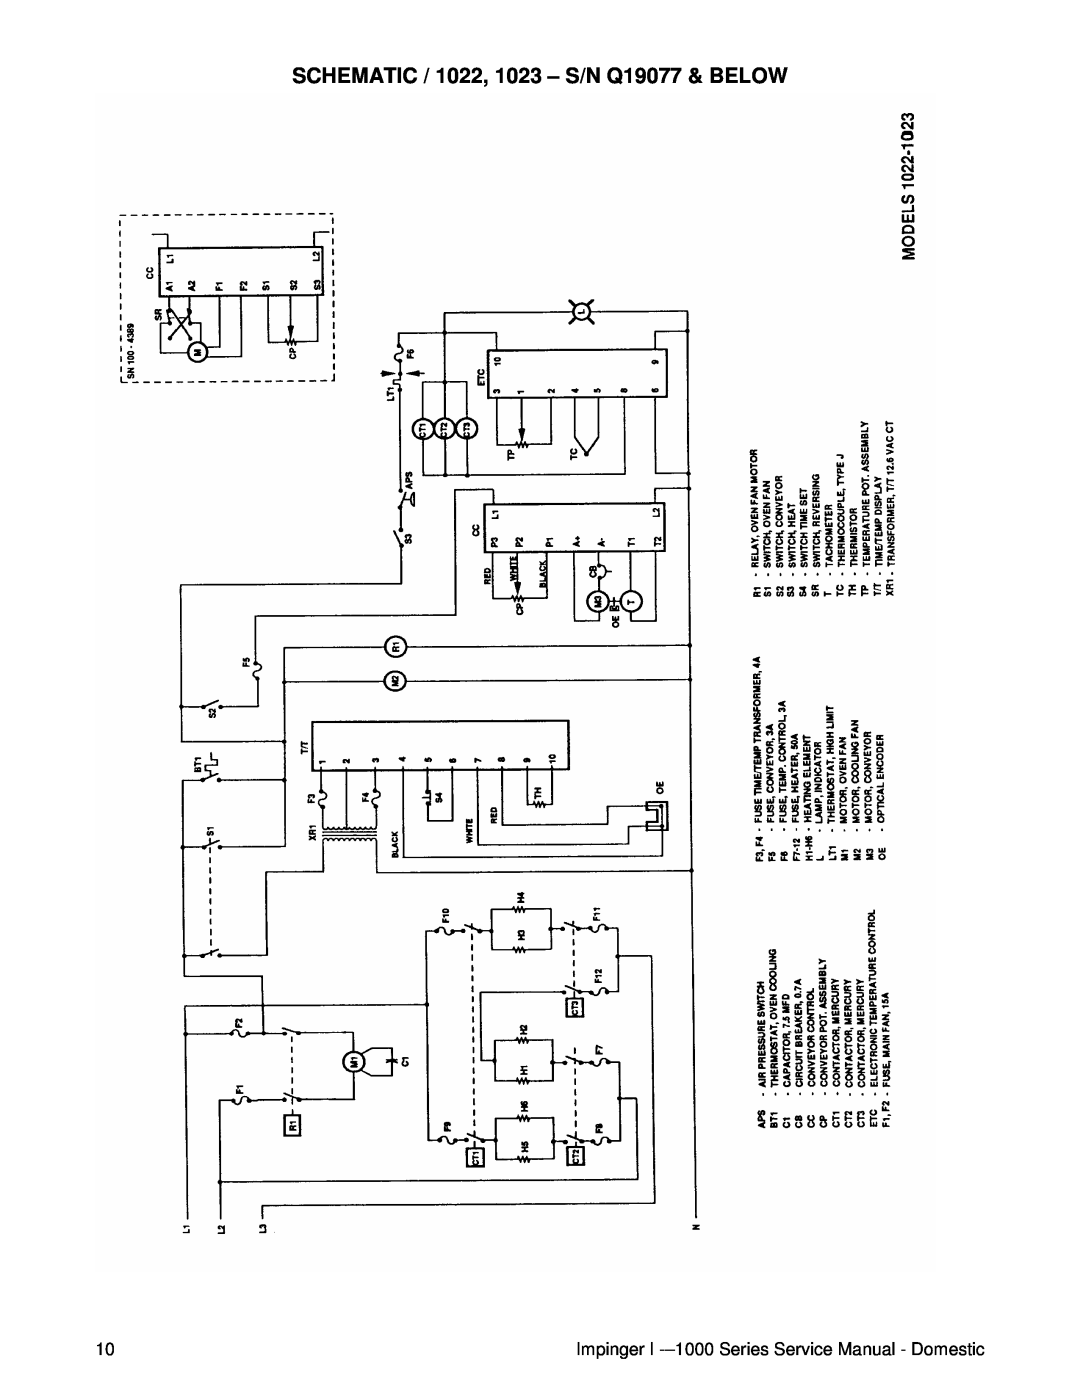 Lincoln 1200, 1400 SCHEMATIC / 1022, 1023 – S/N Q19077 & BELOW, Impinger I -–1000Series Service Manual - Domestic 